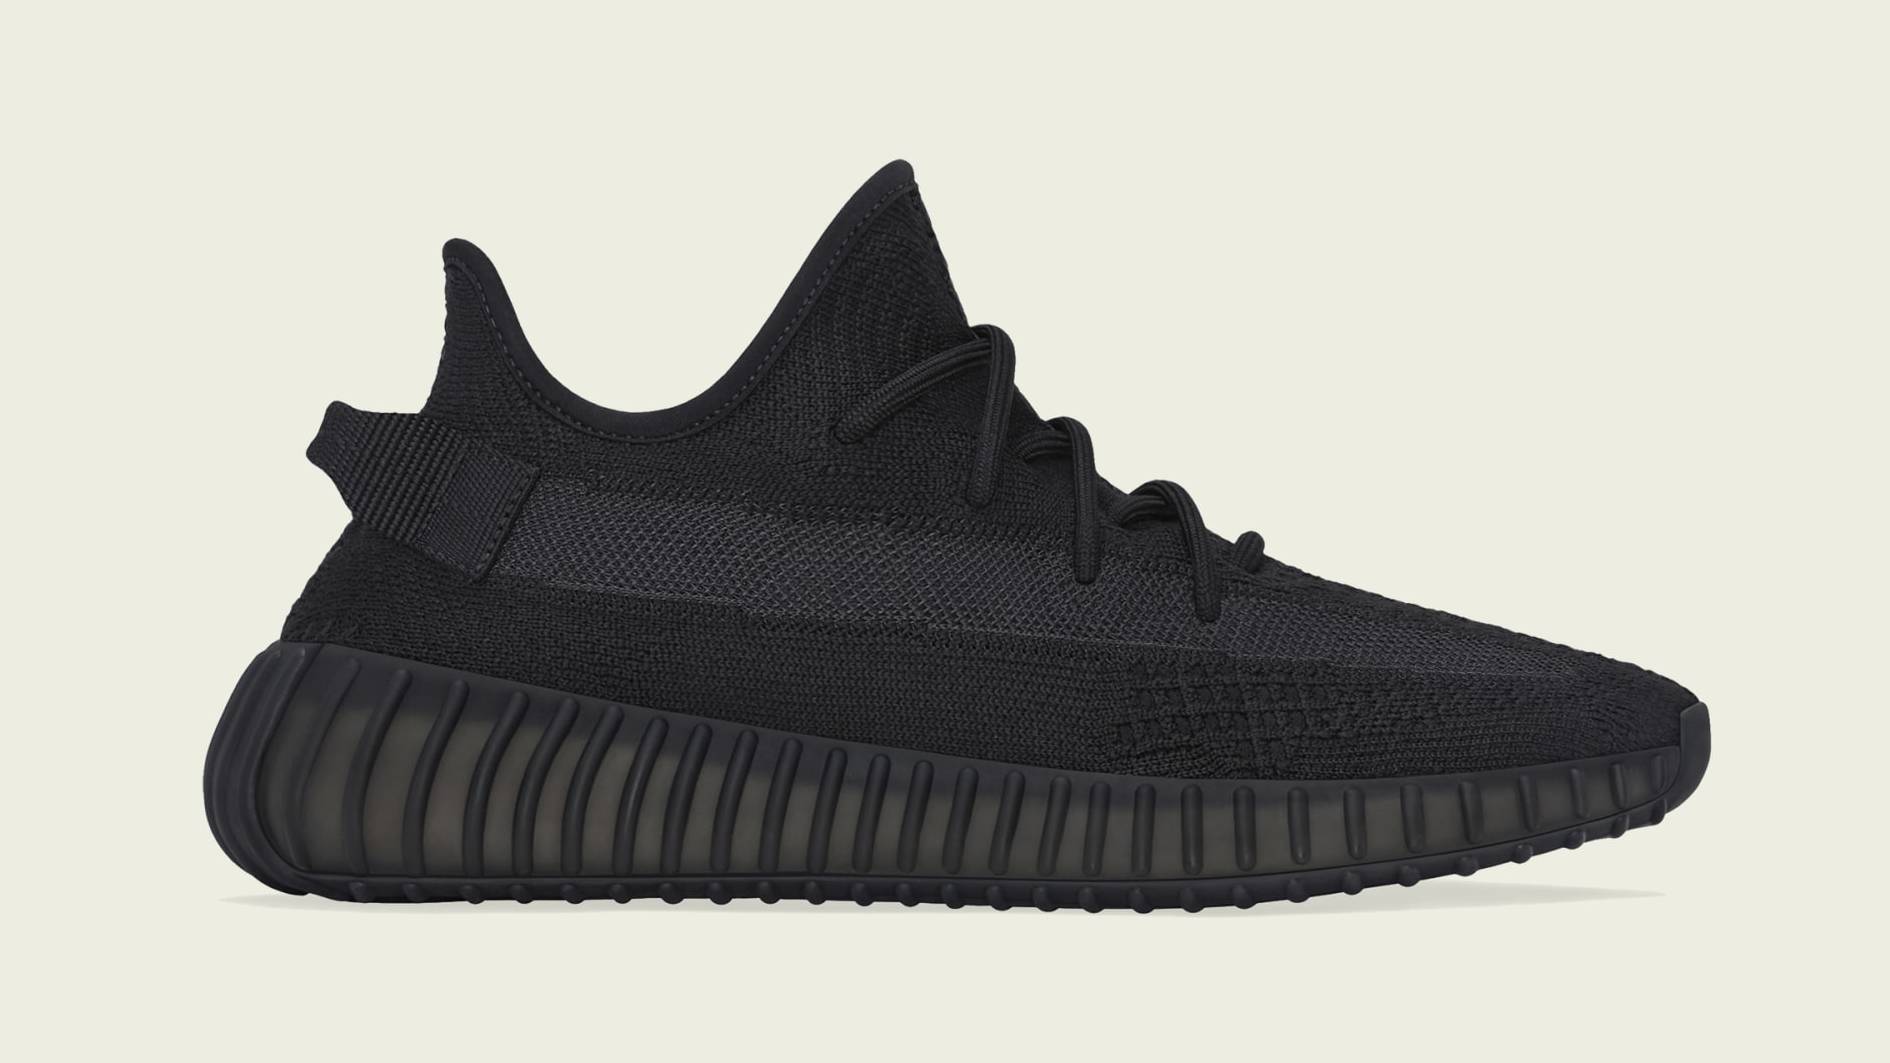 How to Buy the 'Onyx' Adidas Yeezy Boost 350 V2